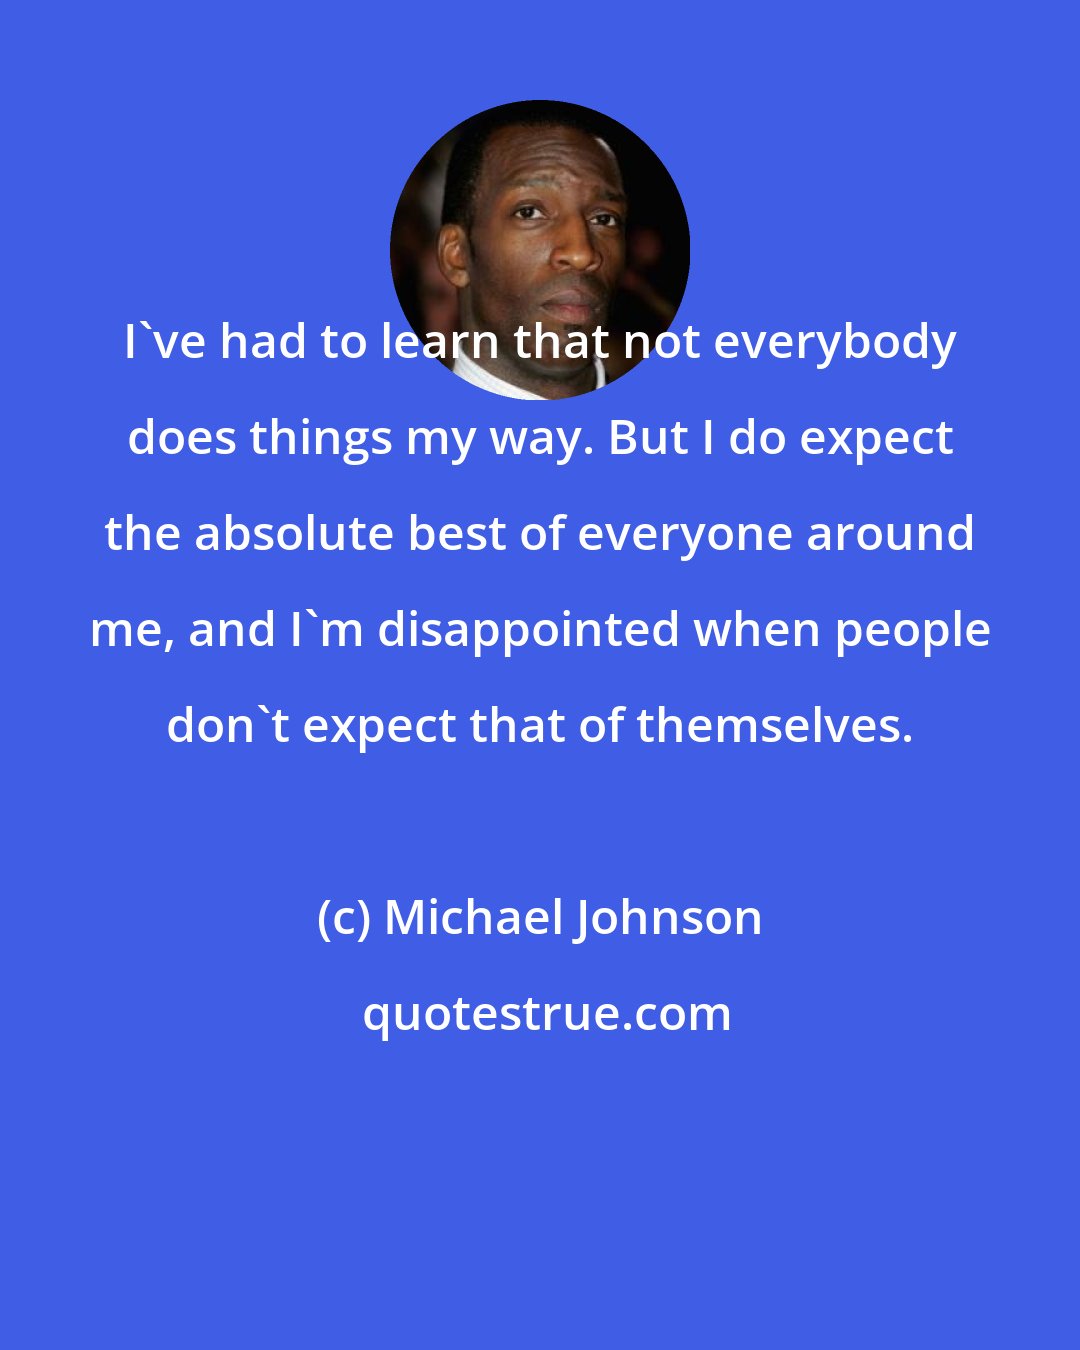 Michael Johnson: I've had to learn that not everybody does things my way. But I do expect the absolute best of everyone around me, and I'm disappointed when people don't expect that of themselves.